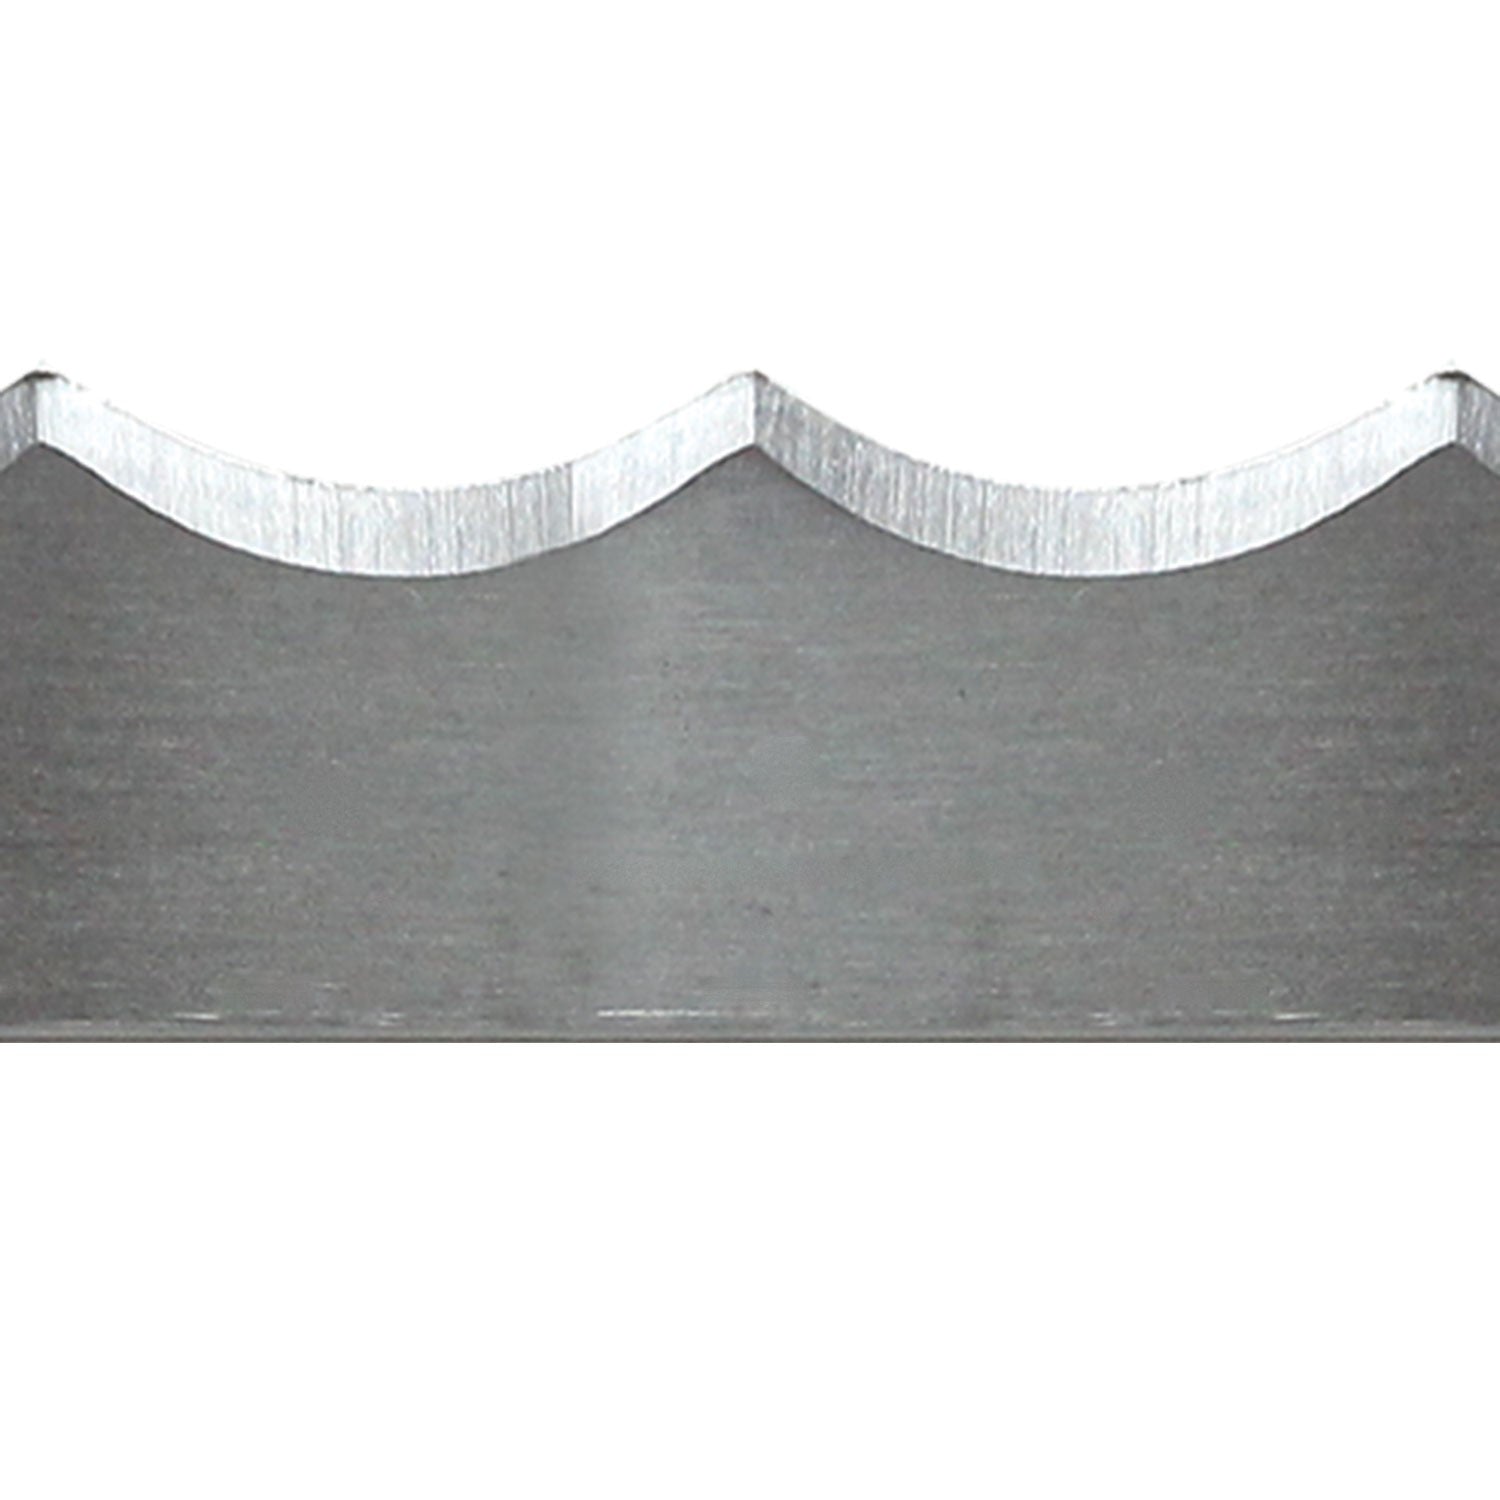 Meat Band Saw Blade - Scallop Edge - 126 in. x 5/8 in. x .022 in. - Pack of 4